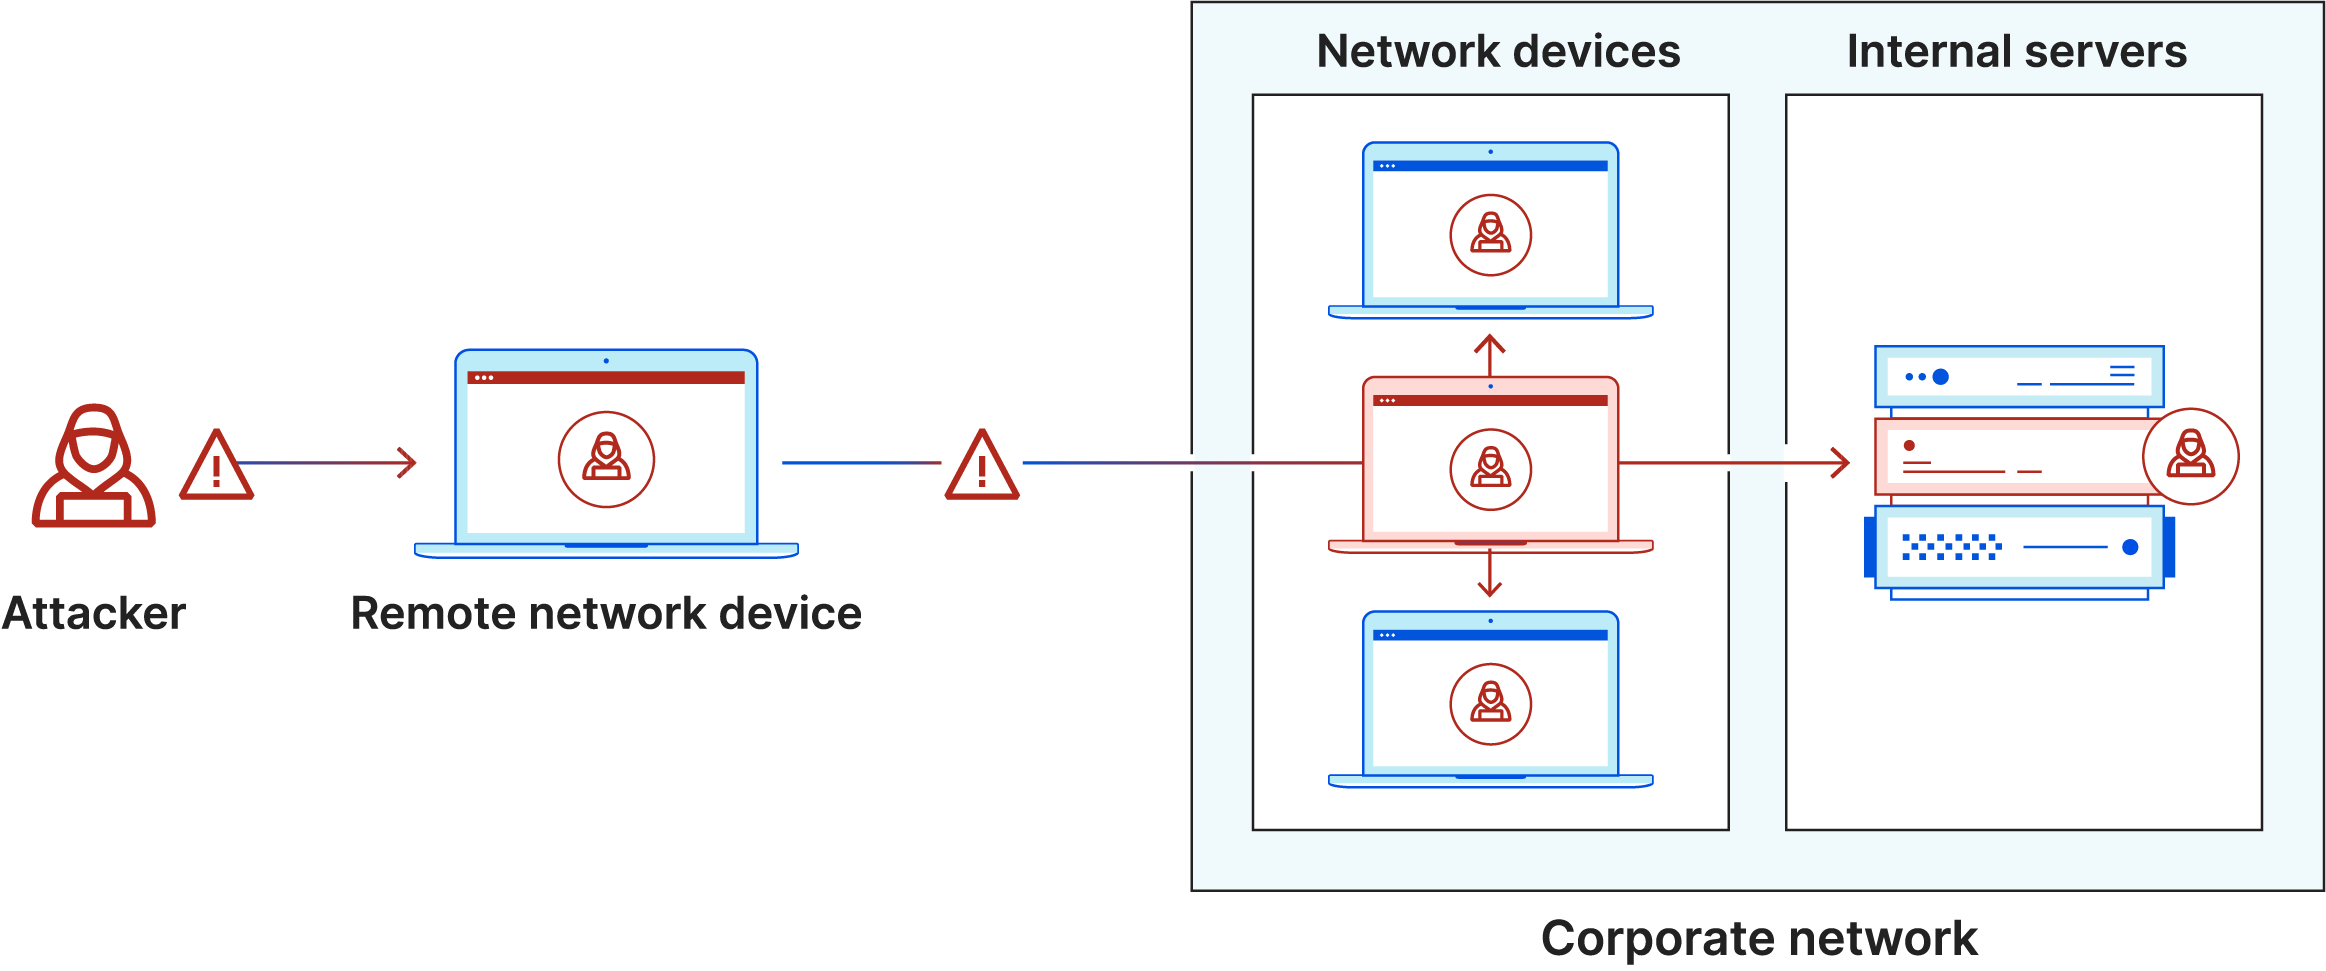 Diagram of lateral movement. Attacker infects laptop, enters secure network, moves laterally to other computers and servers.